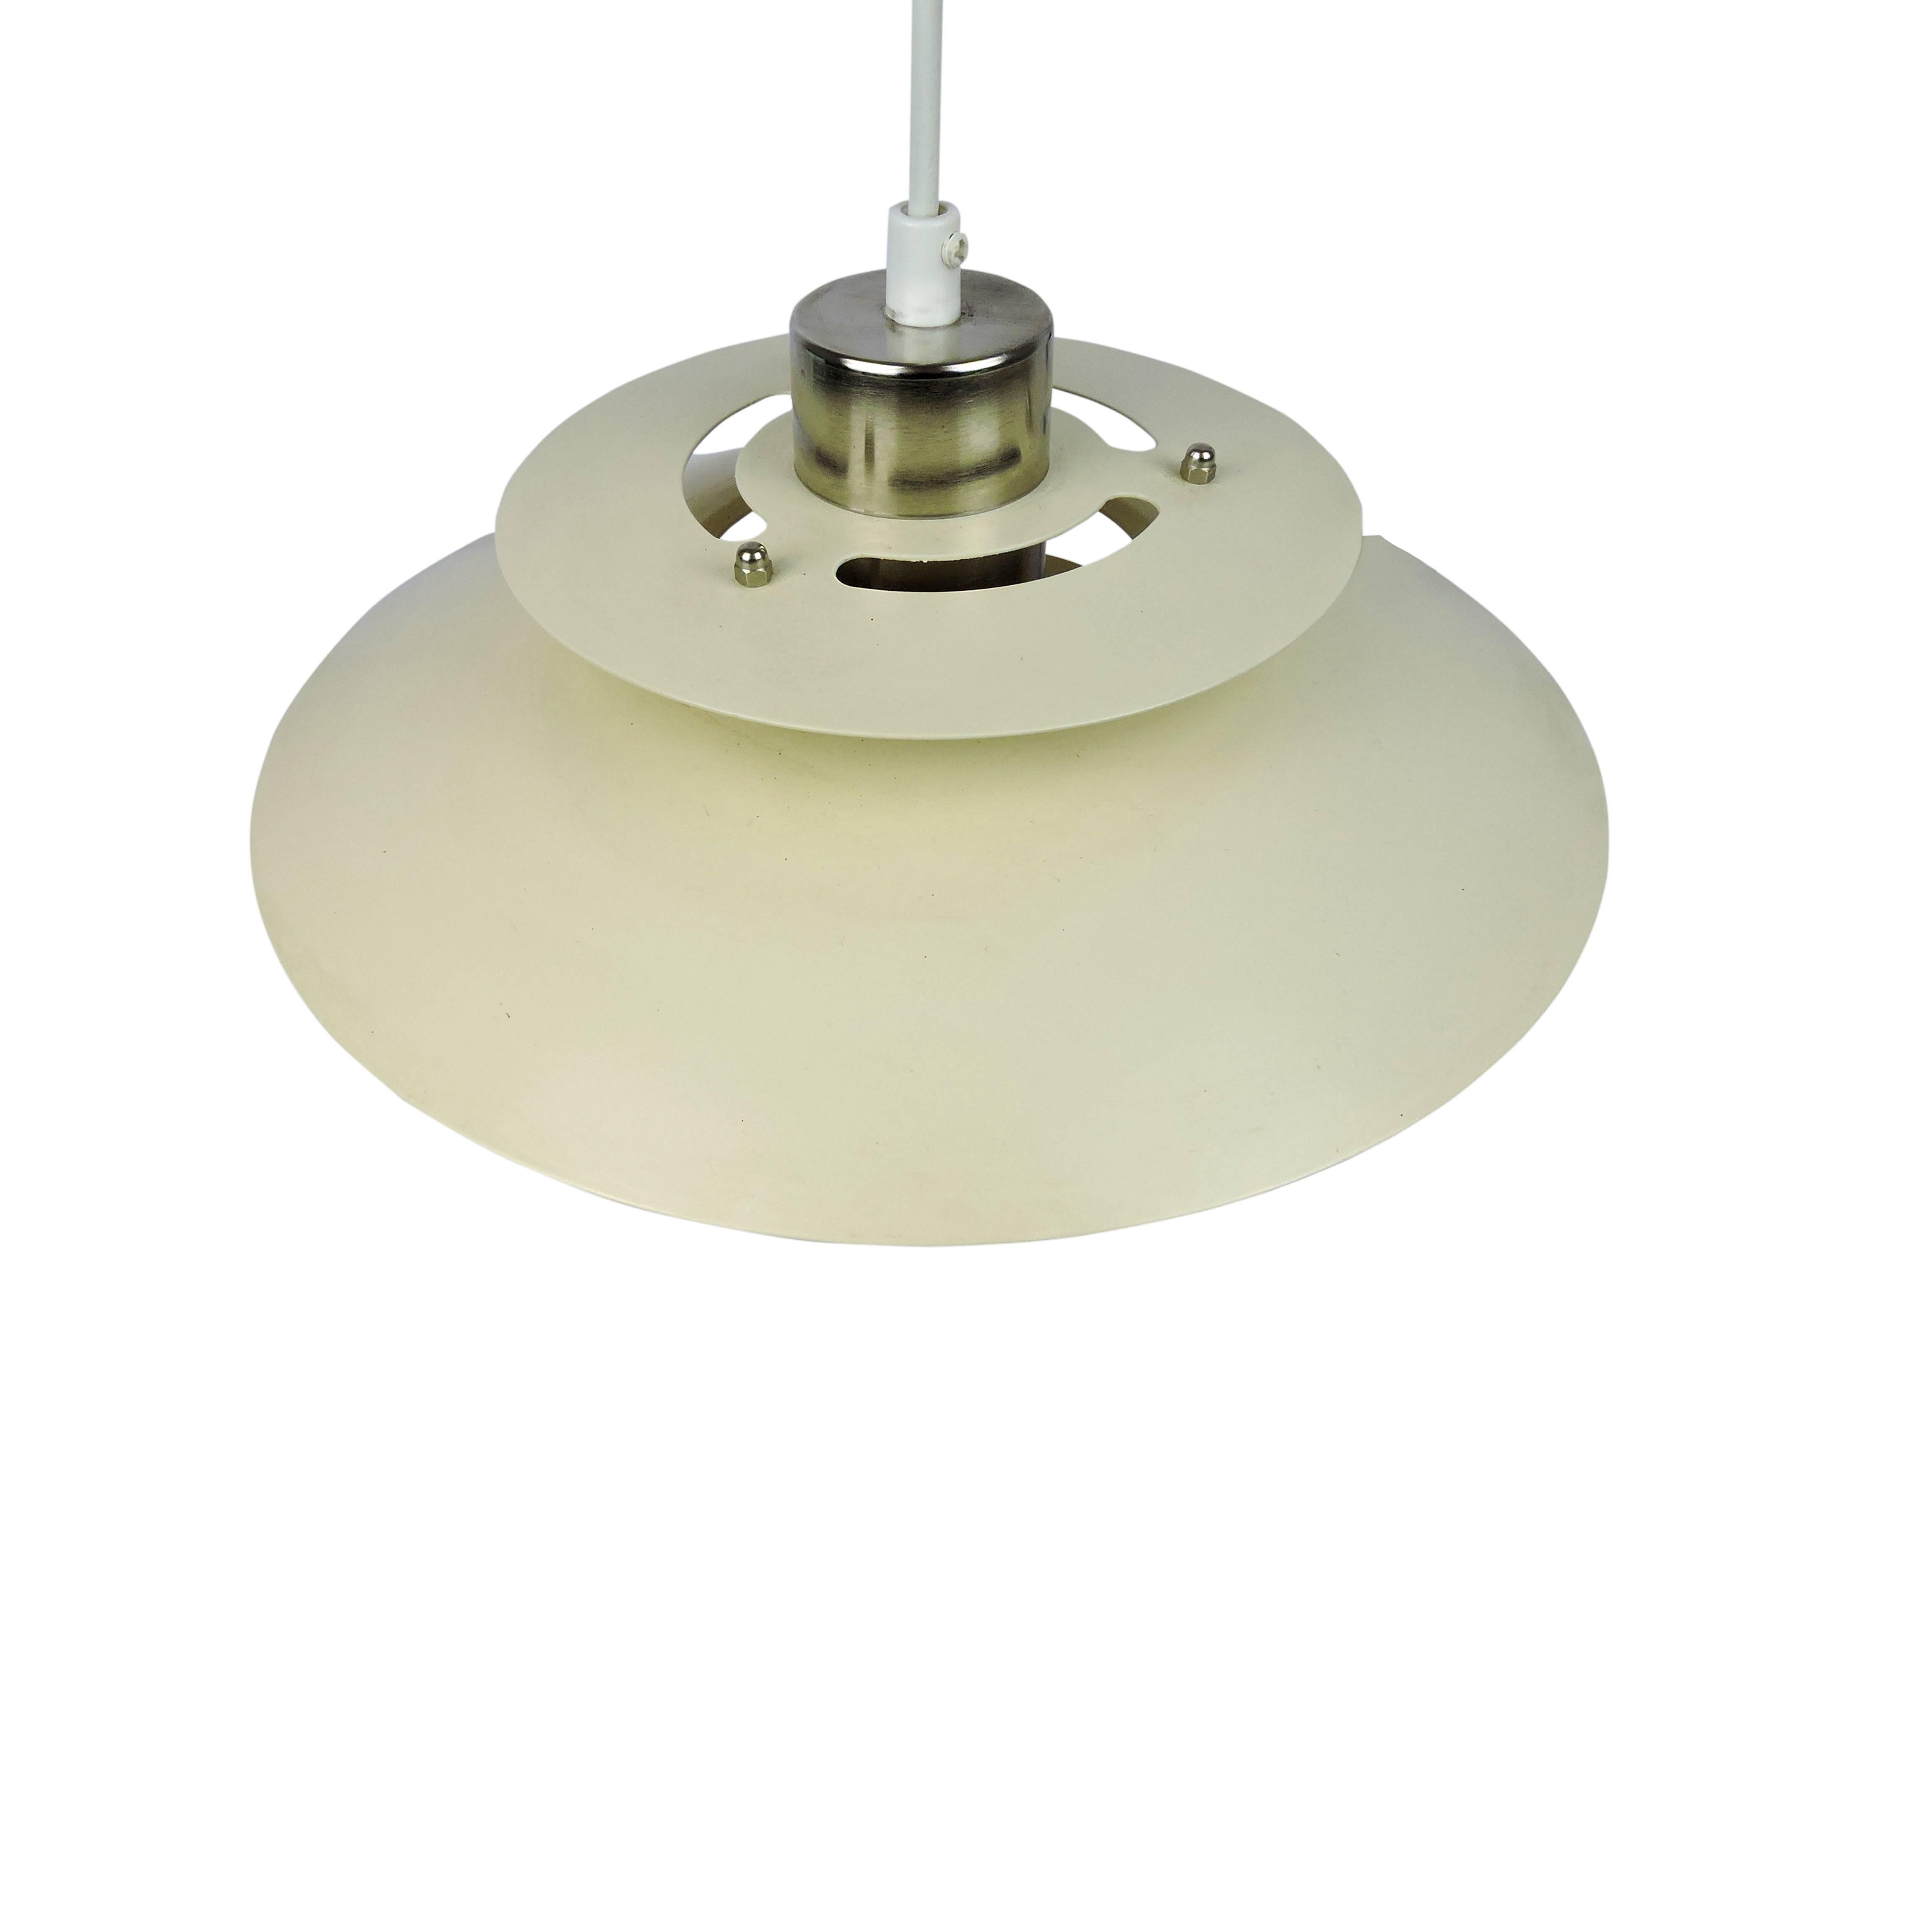 A Danish pendant light featuring a metal curved discus shape in ivory with exposed chrome.